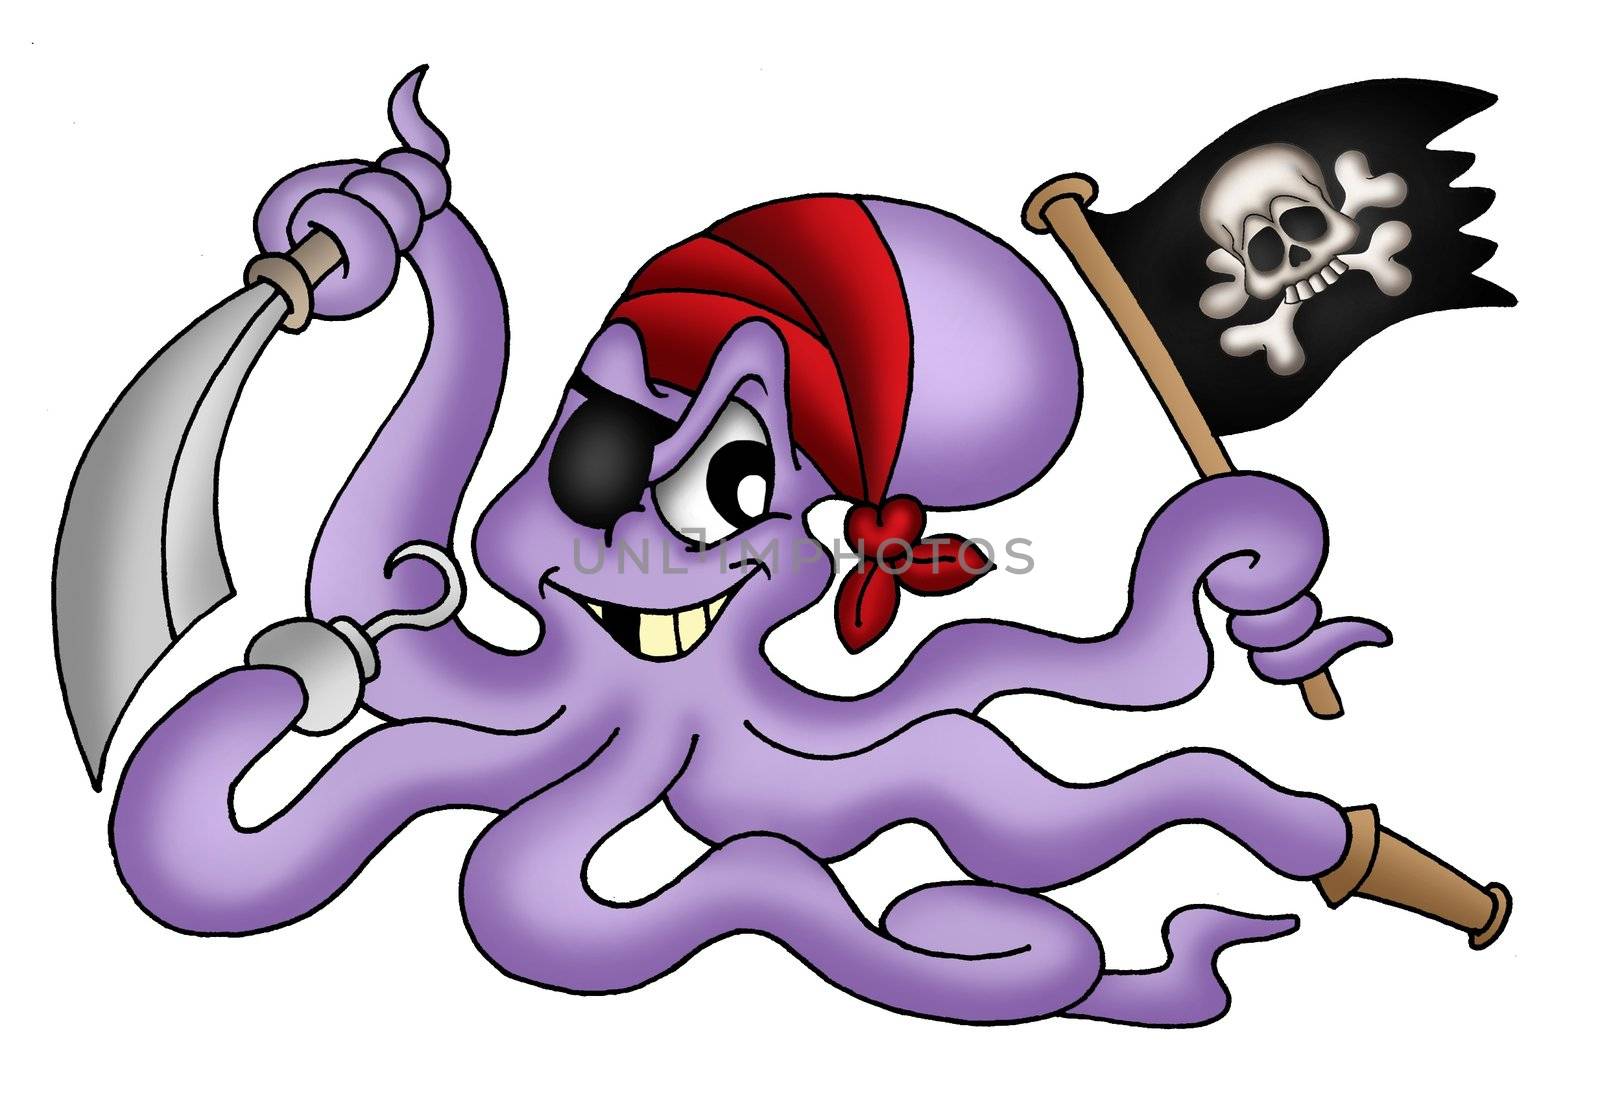 Color illustration of pirate octopus.